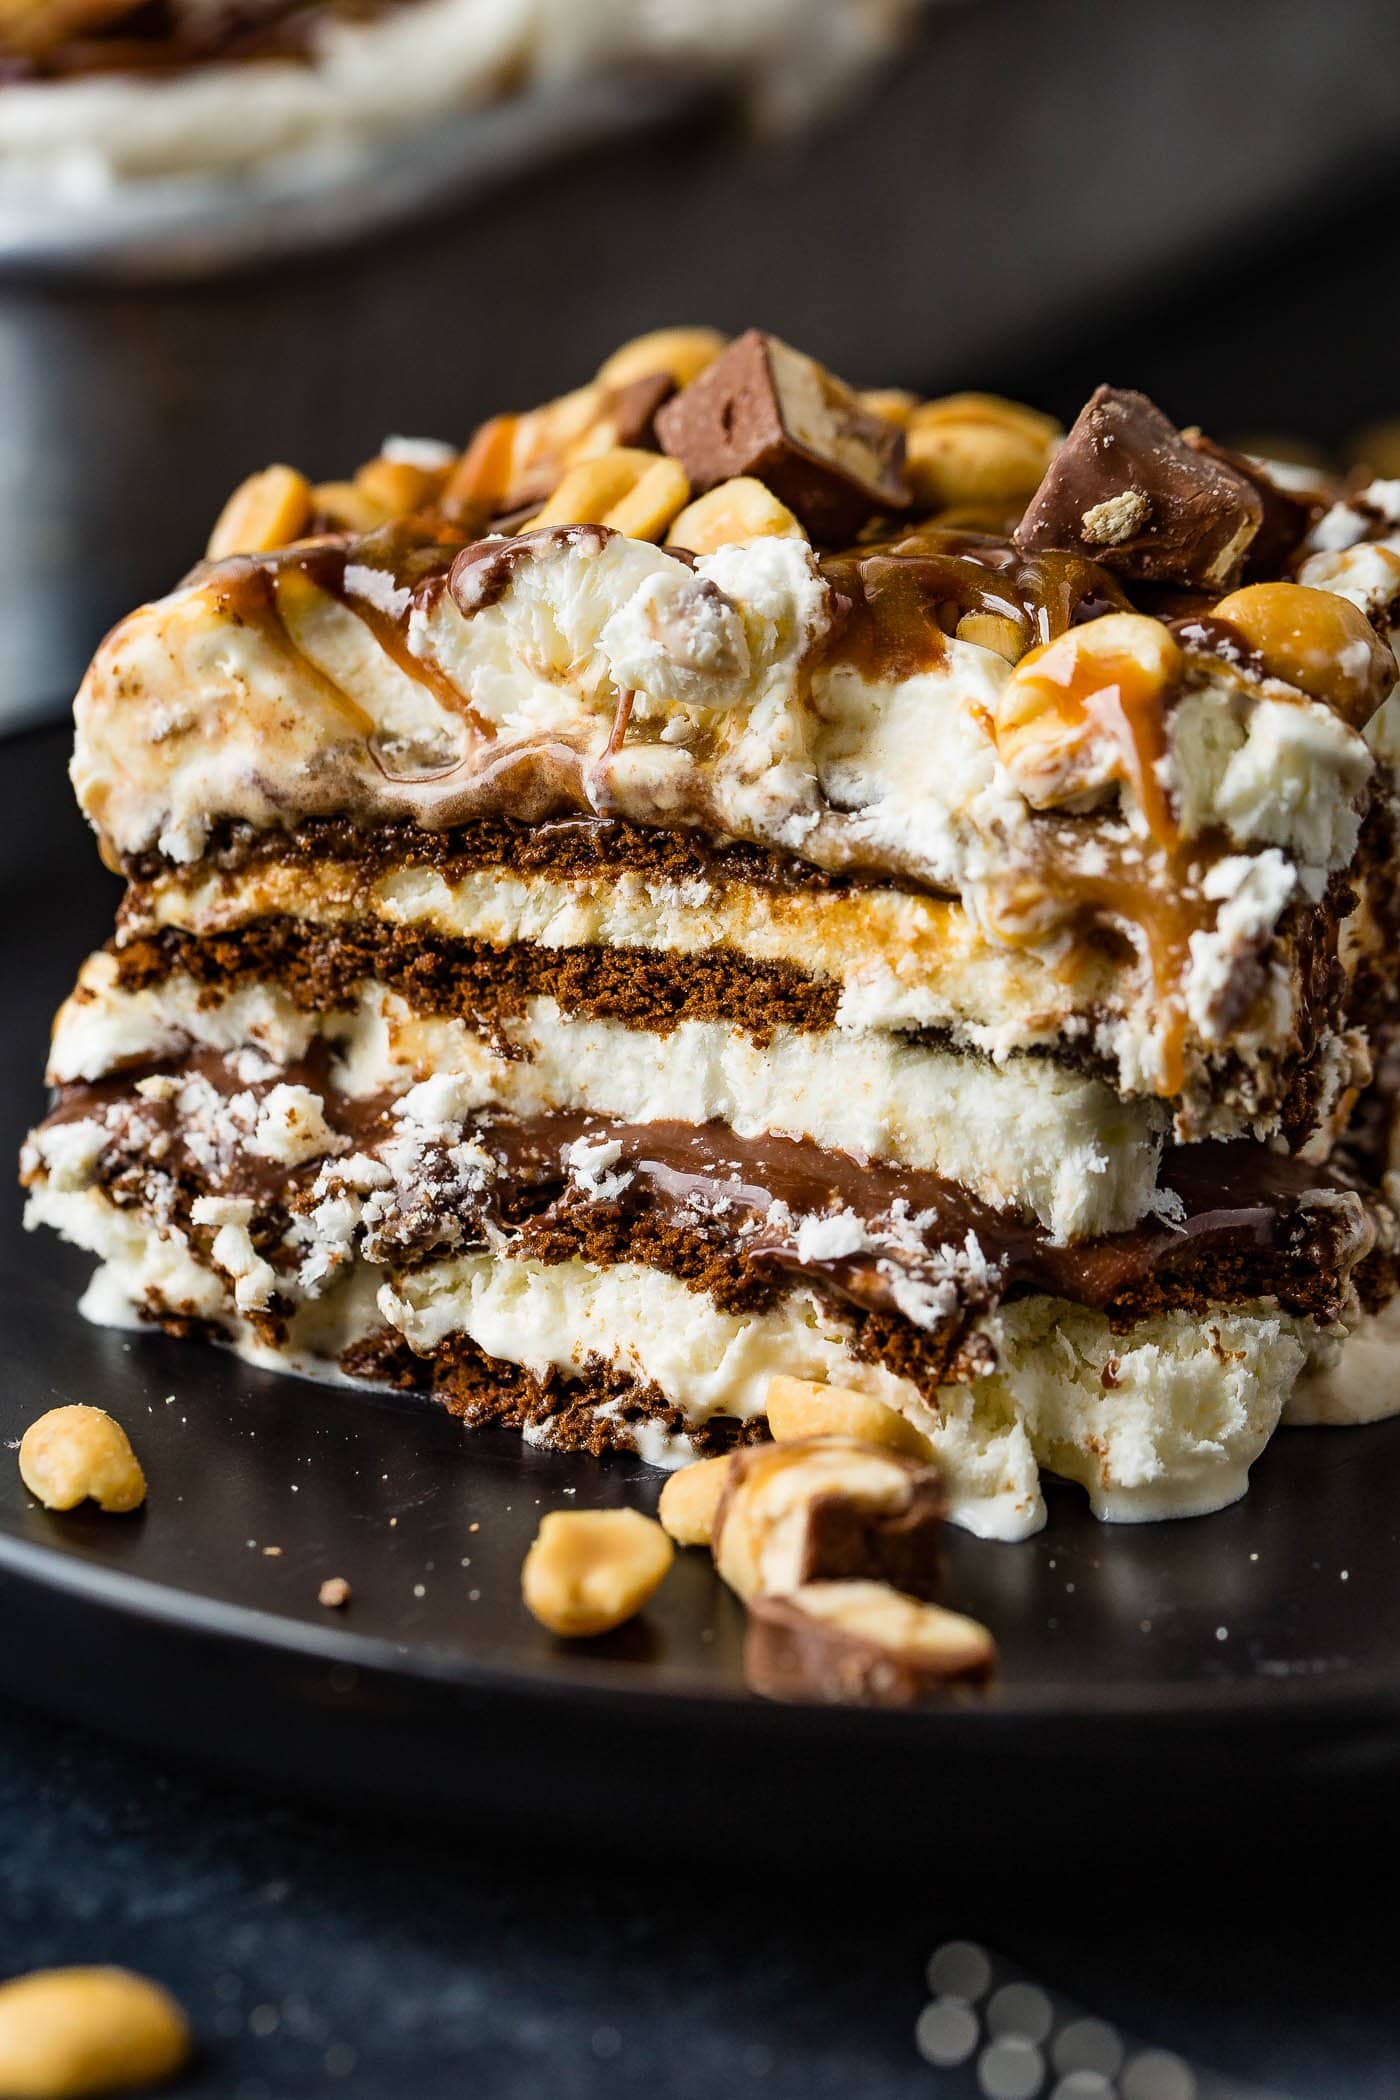 A square piece of snickers ice cream cake. There are layers of cake, ice cream, hot fudge, caramel sauce, snickers candy bars and whipped cream. The cake is topped with whipped cream, drizzles of hot fudge and caramel sauce and salted peanuts.